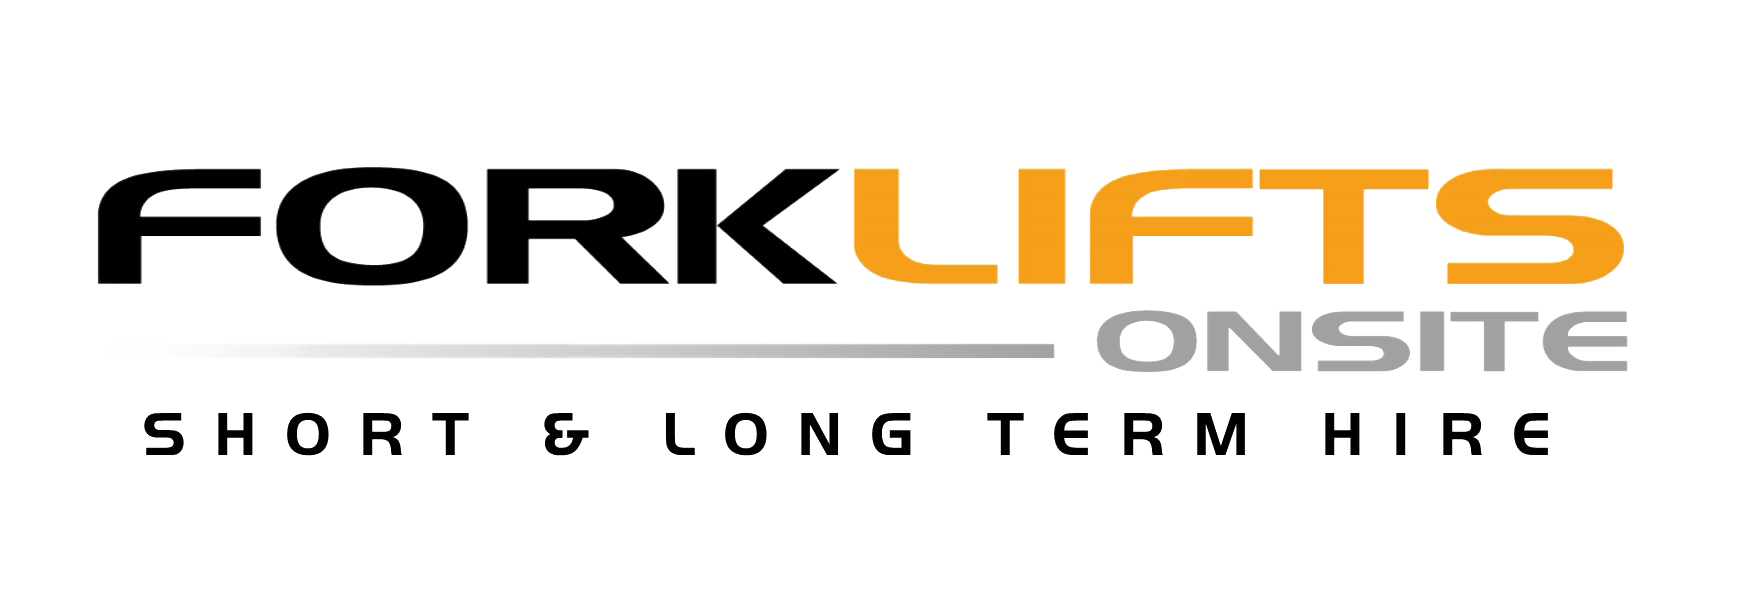 Home Forklifts Onsite Forklift Hire Adelaide Forklift Attachments